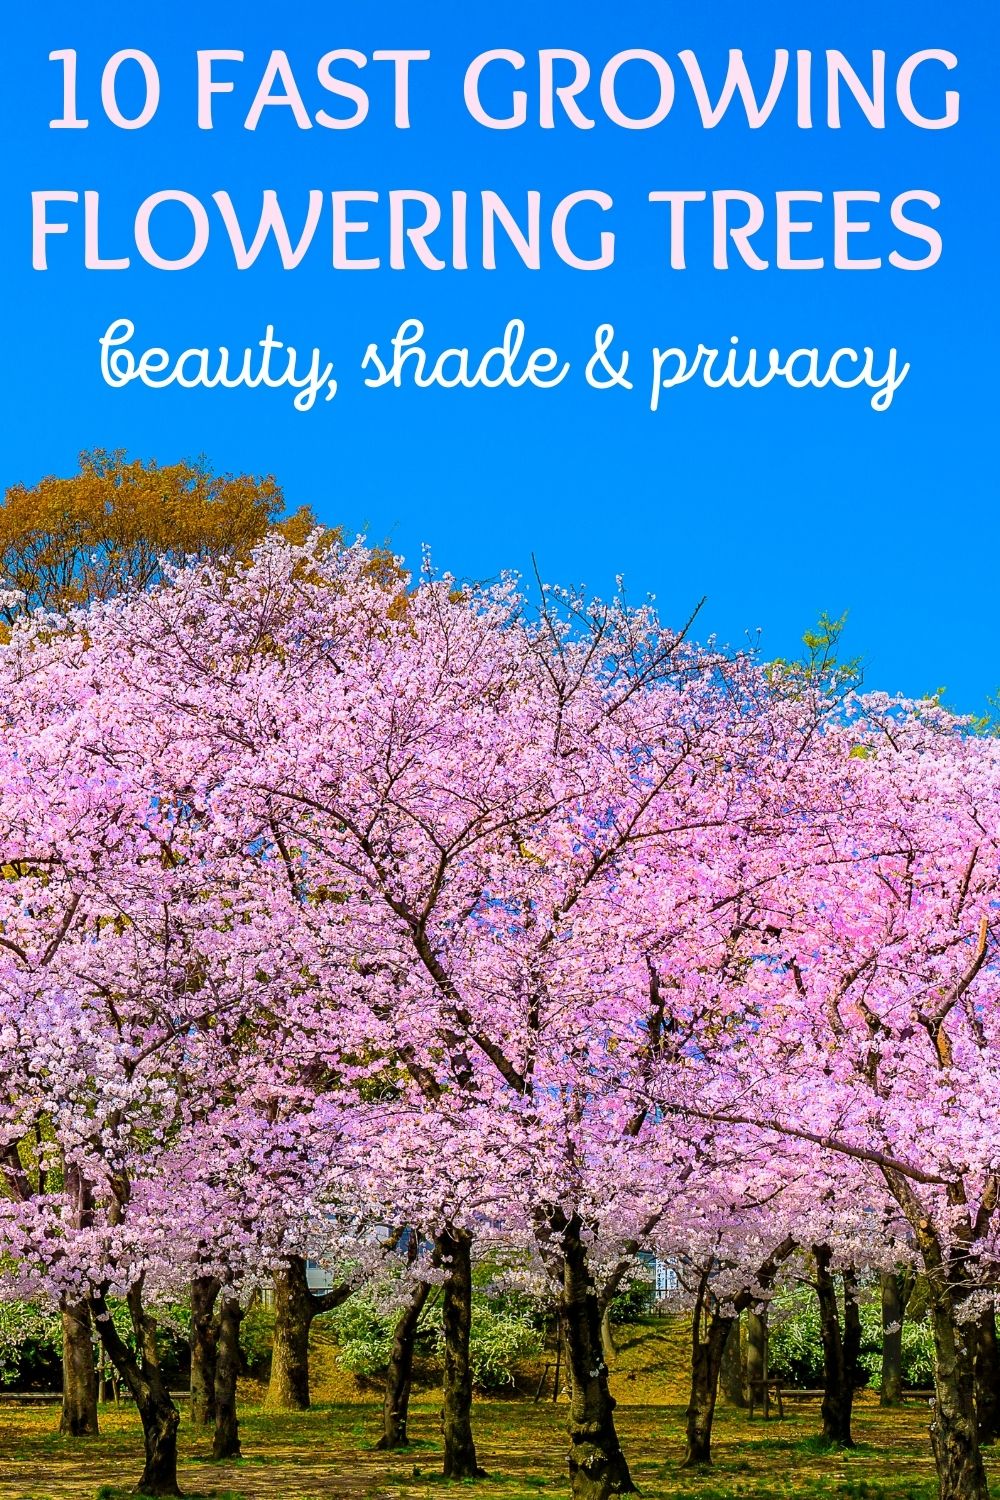 10 fast growing flowering trees for beauty, shade, and privacy